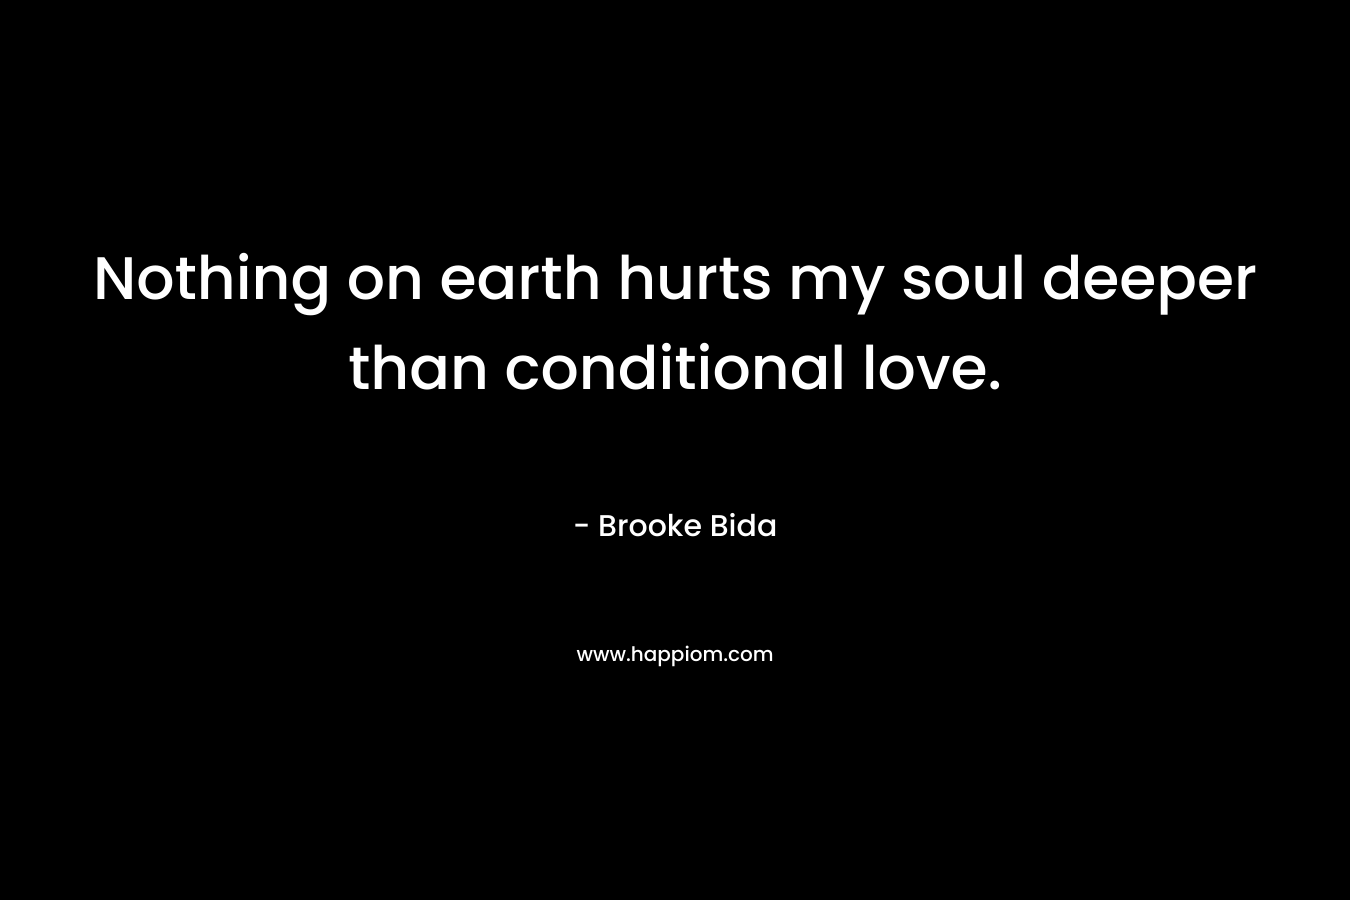 Nothing on earth hurts my soul deeper than conditional love.